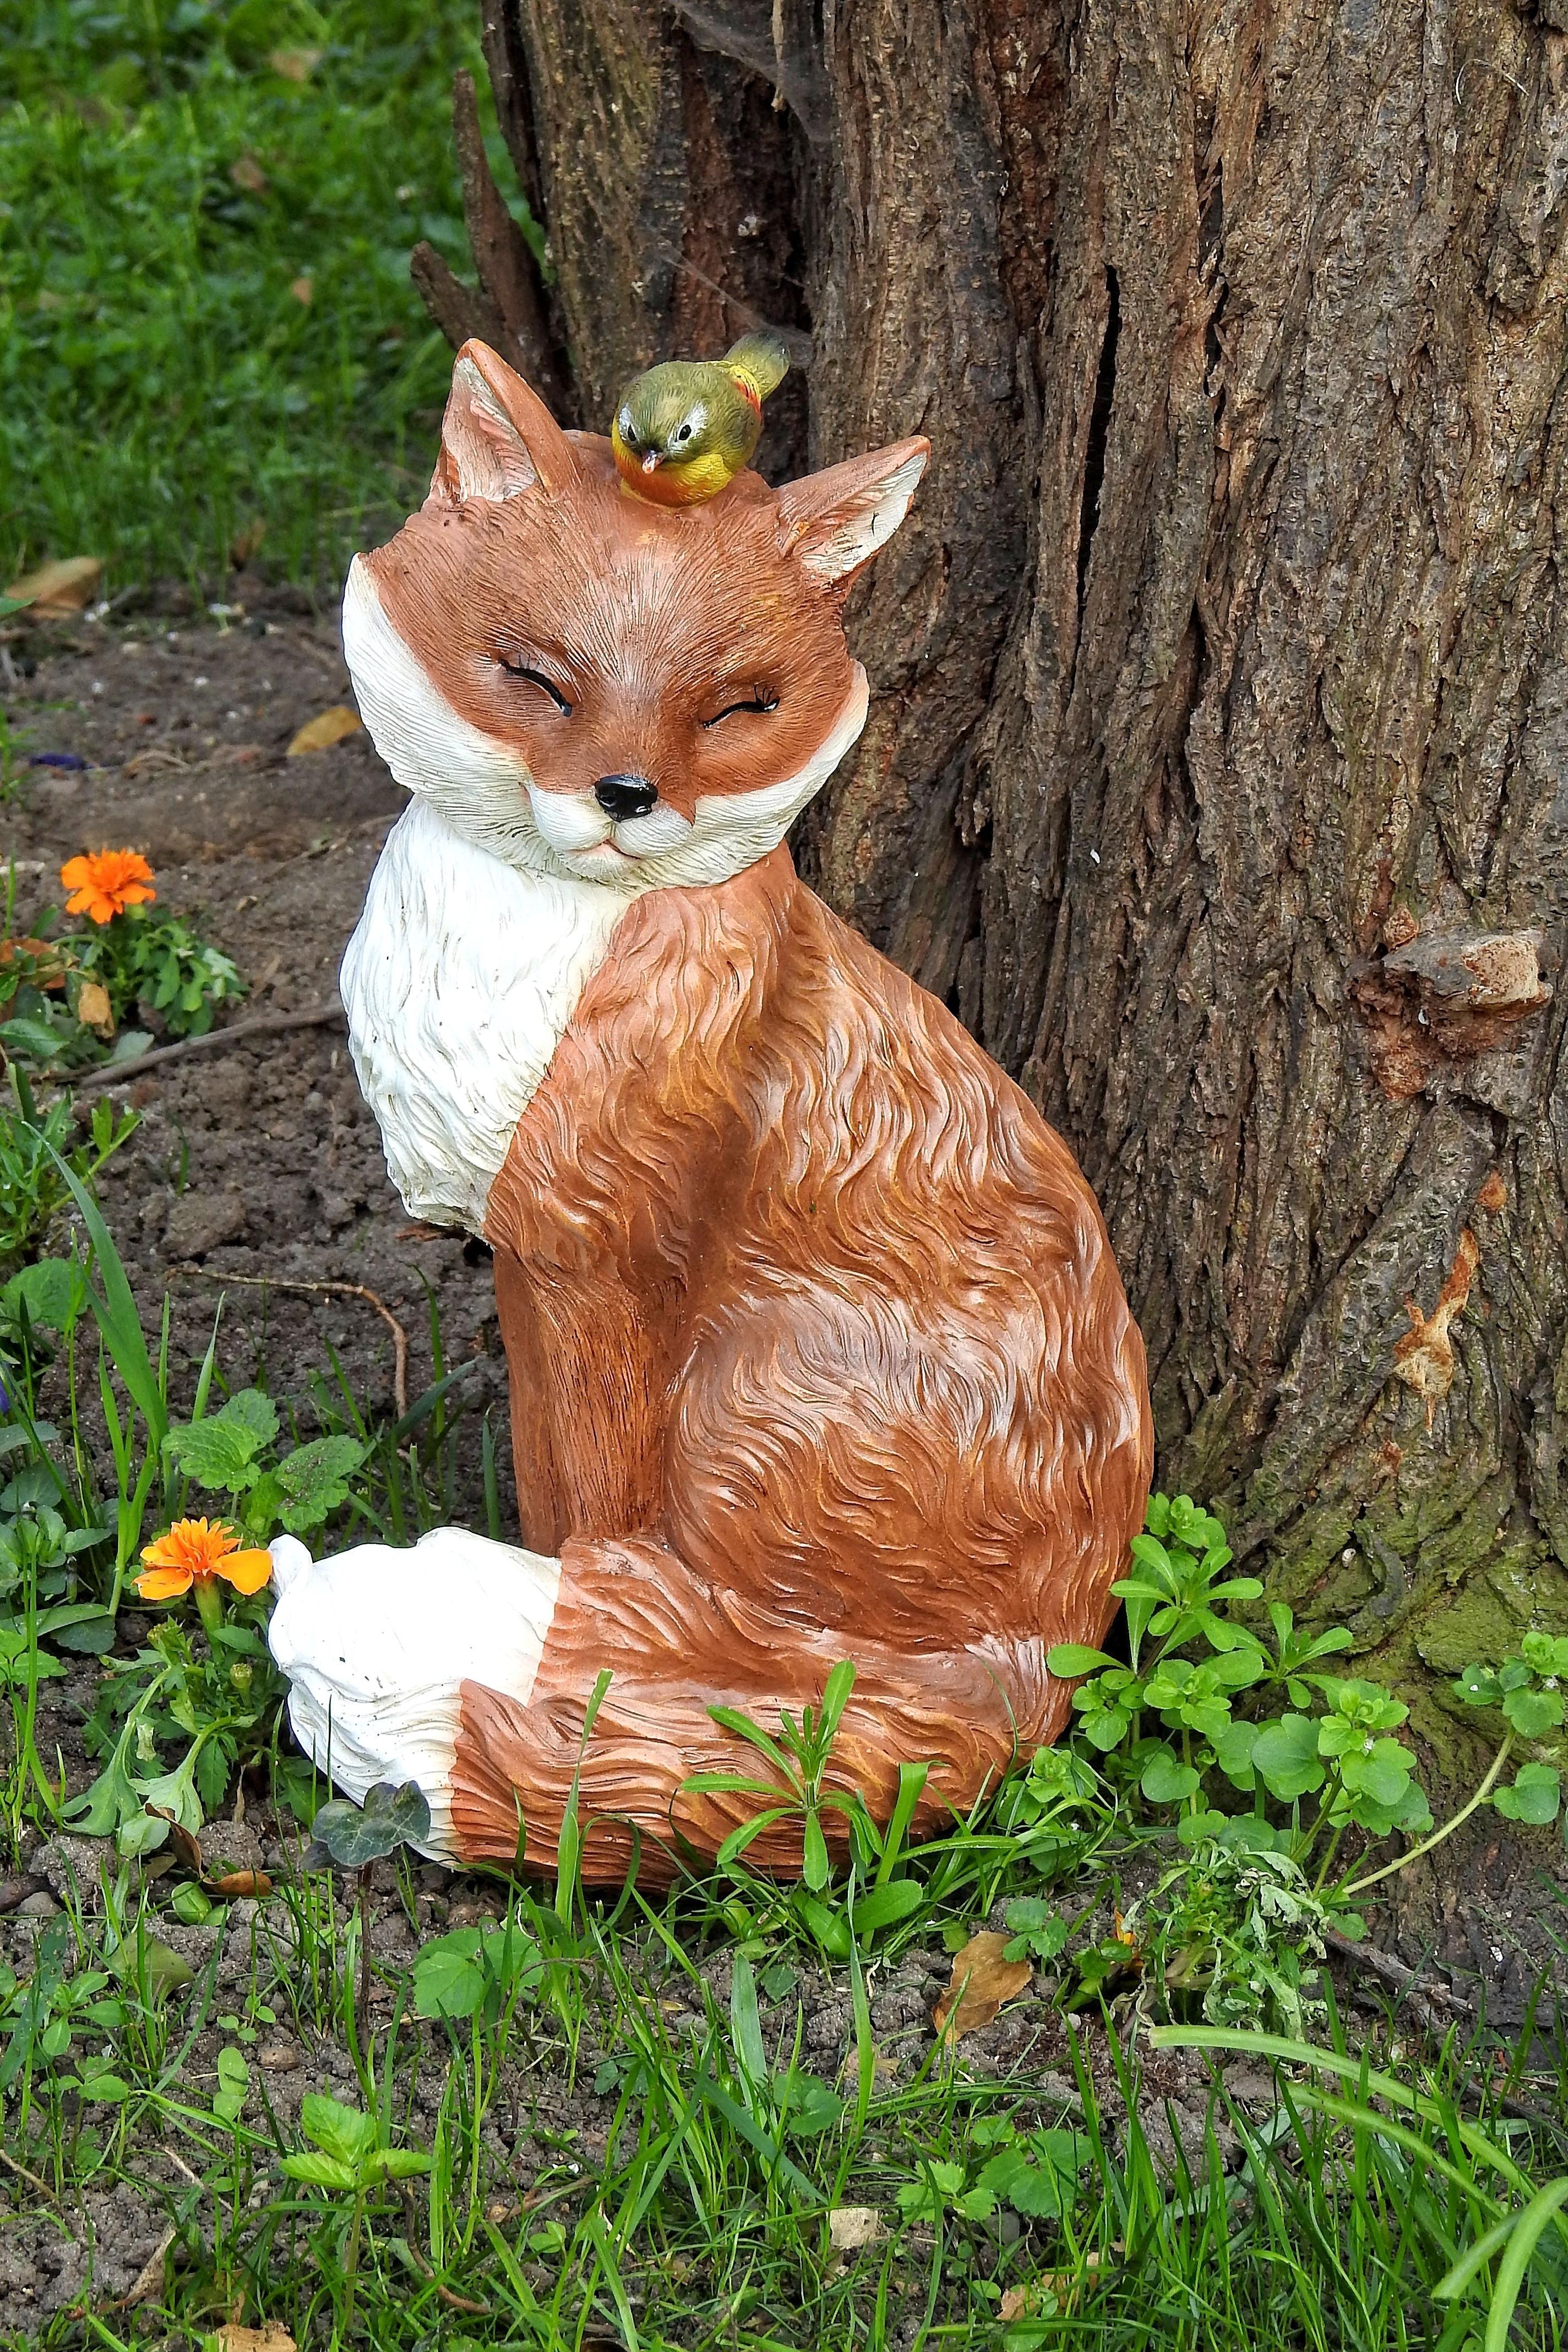 green and yellow bird on head of brown and white fox figurine